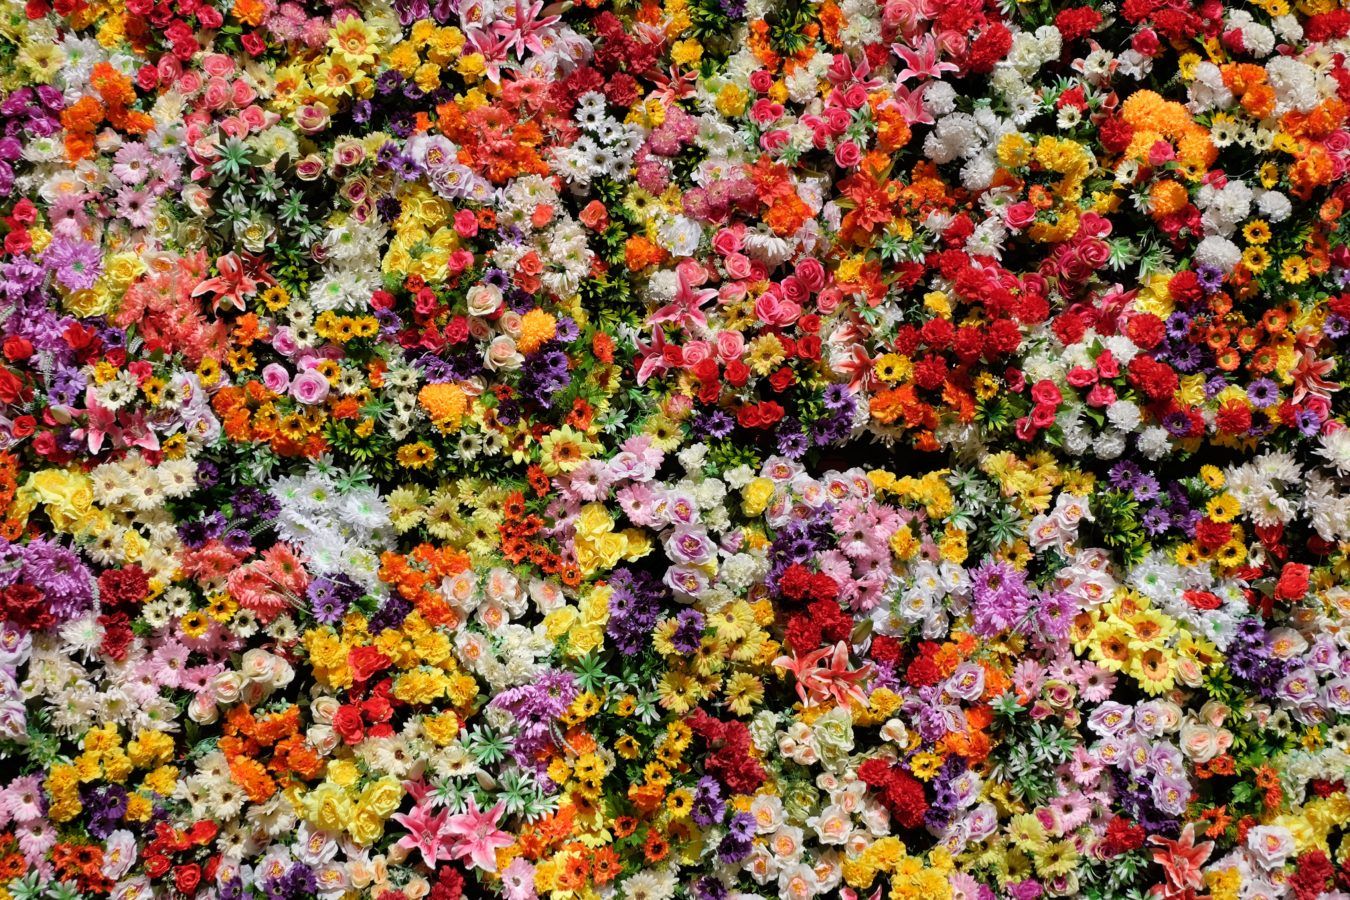 50 of the most beautiful flowers to lift your spirit